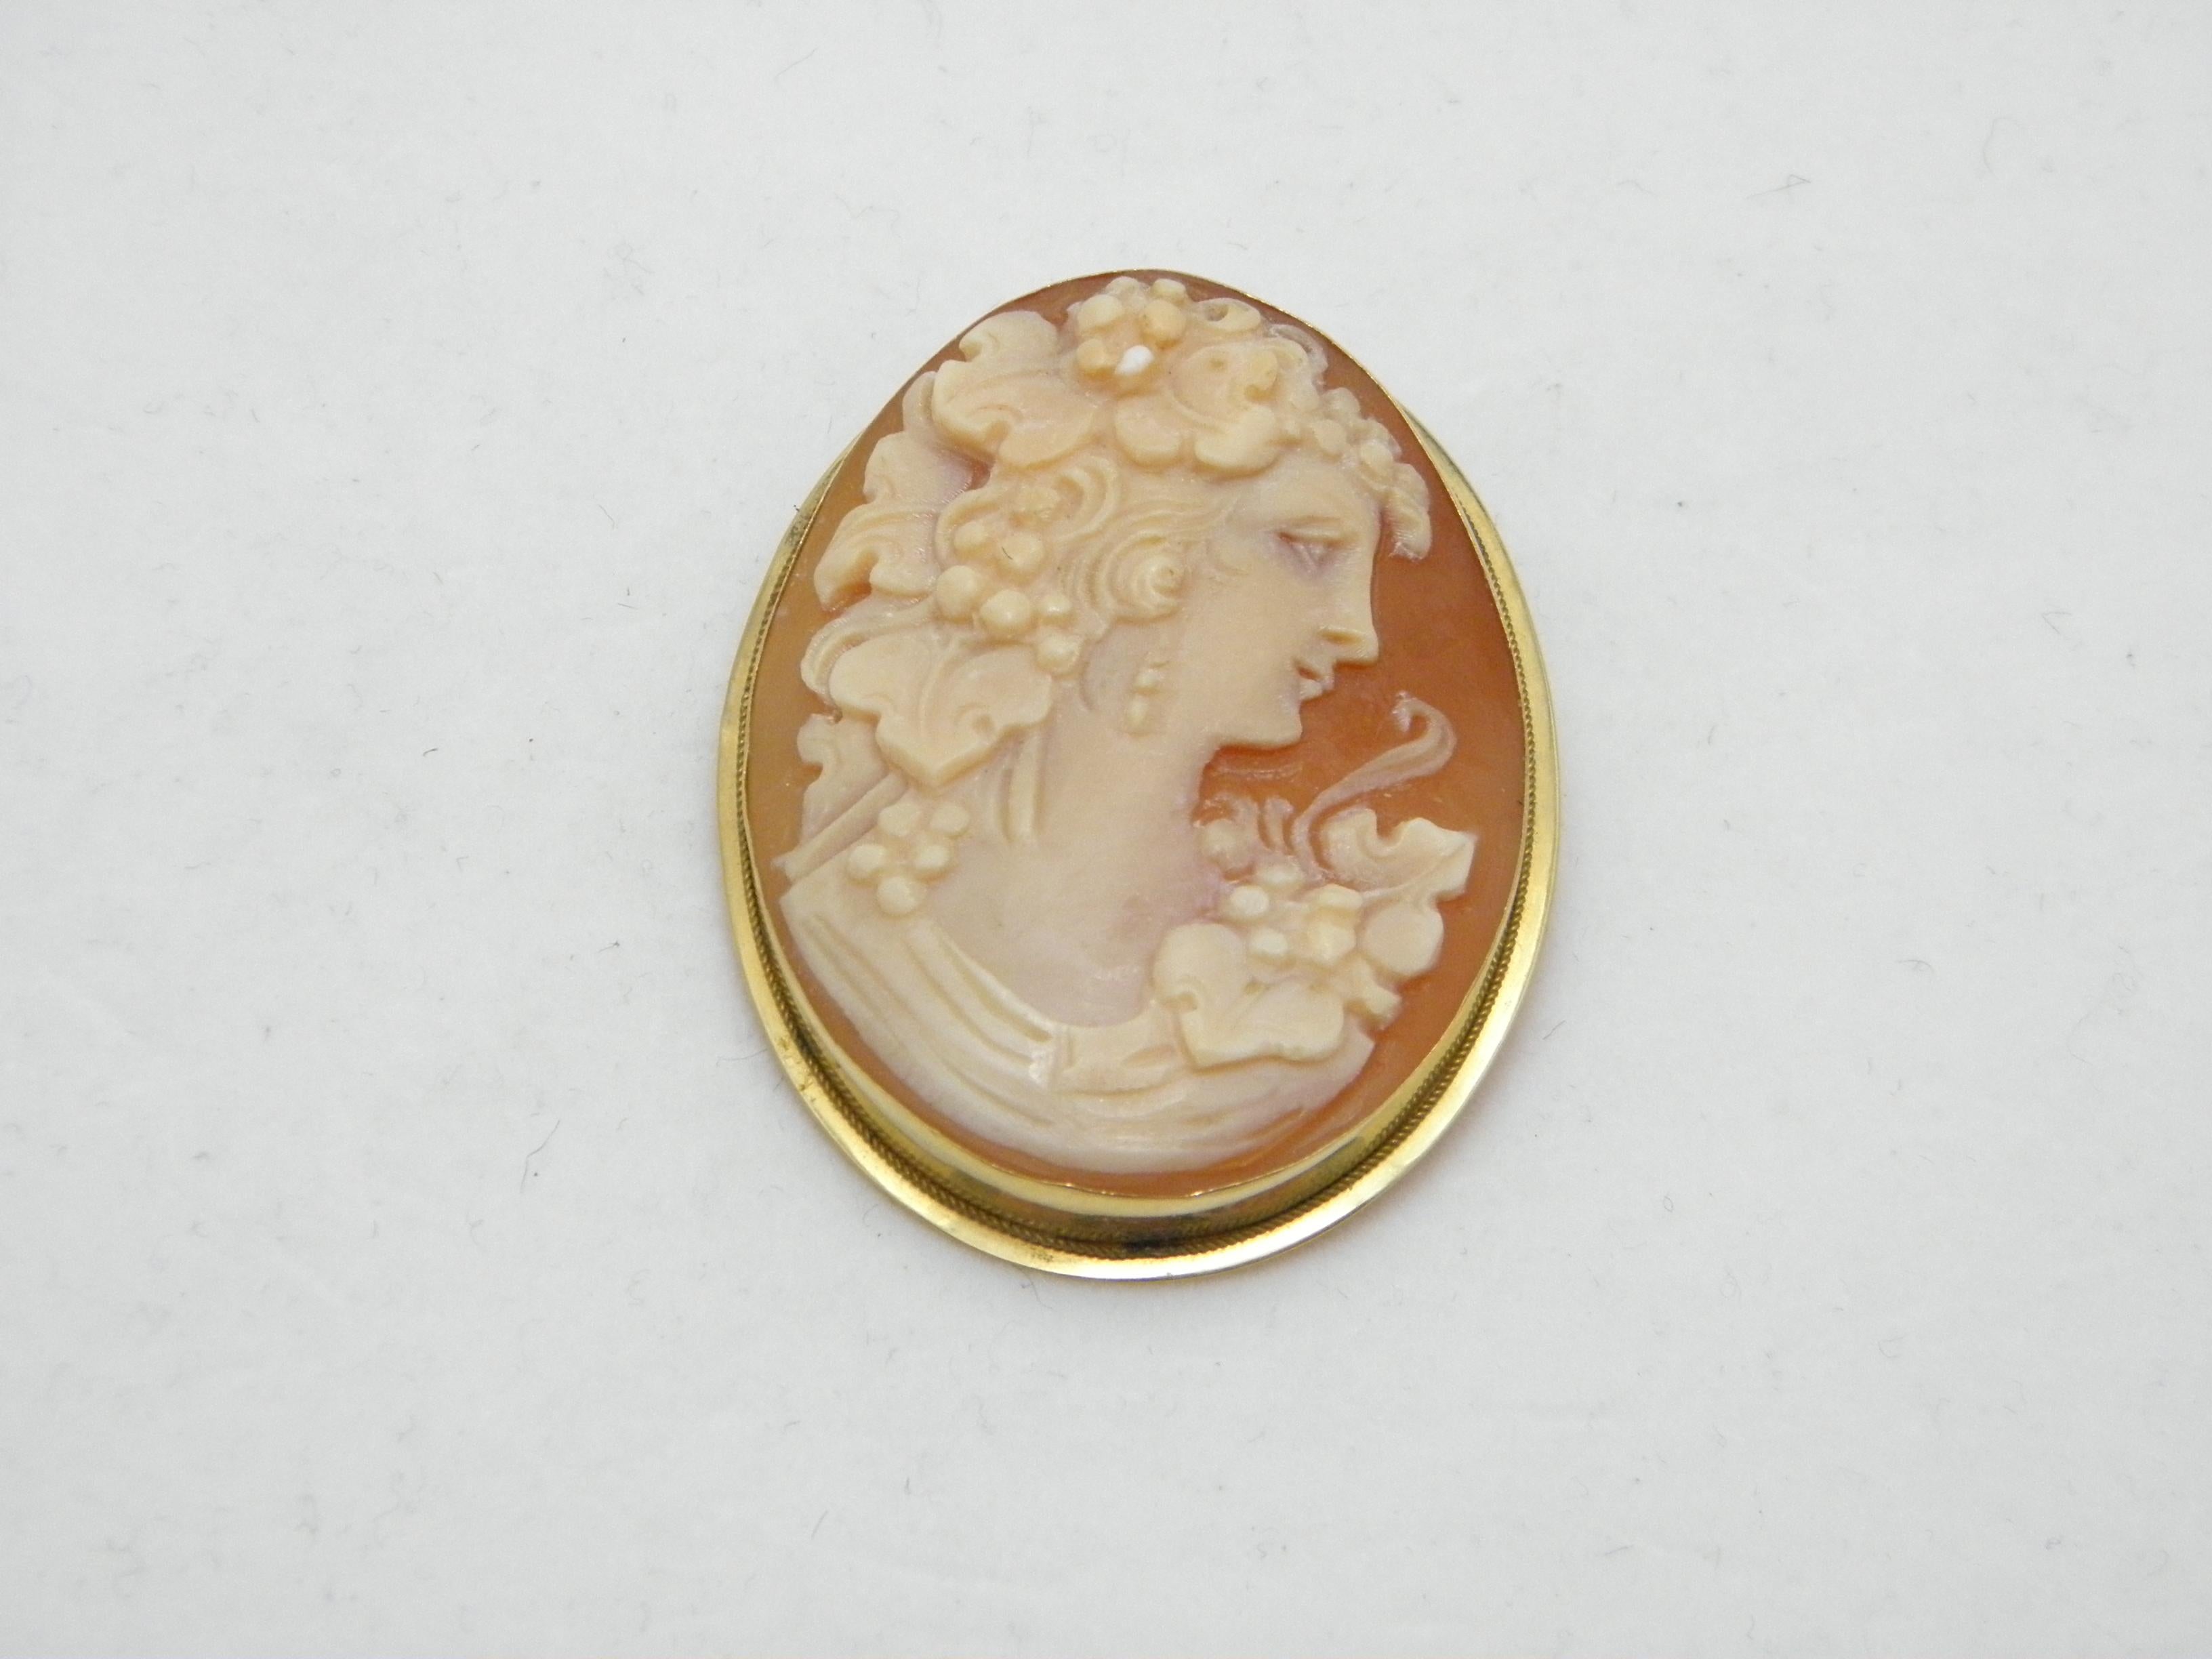 If you have landed on this page then you have an eye for beauty.

On offer is this gorgeous

18CT HEAVY GOLD GOLD CARVED SHELL CAMEO BROOCH

DETAILS
Material: 18ct (750/000) Solid Yellow Gold - thick and lovely design.
Style: Victorian classic